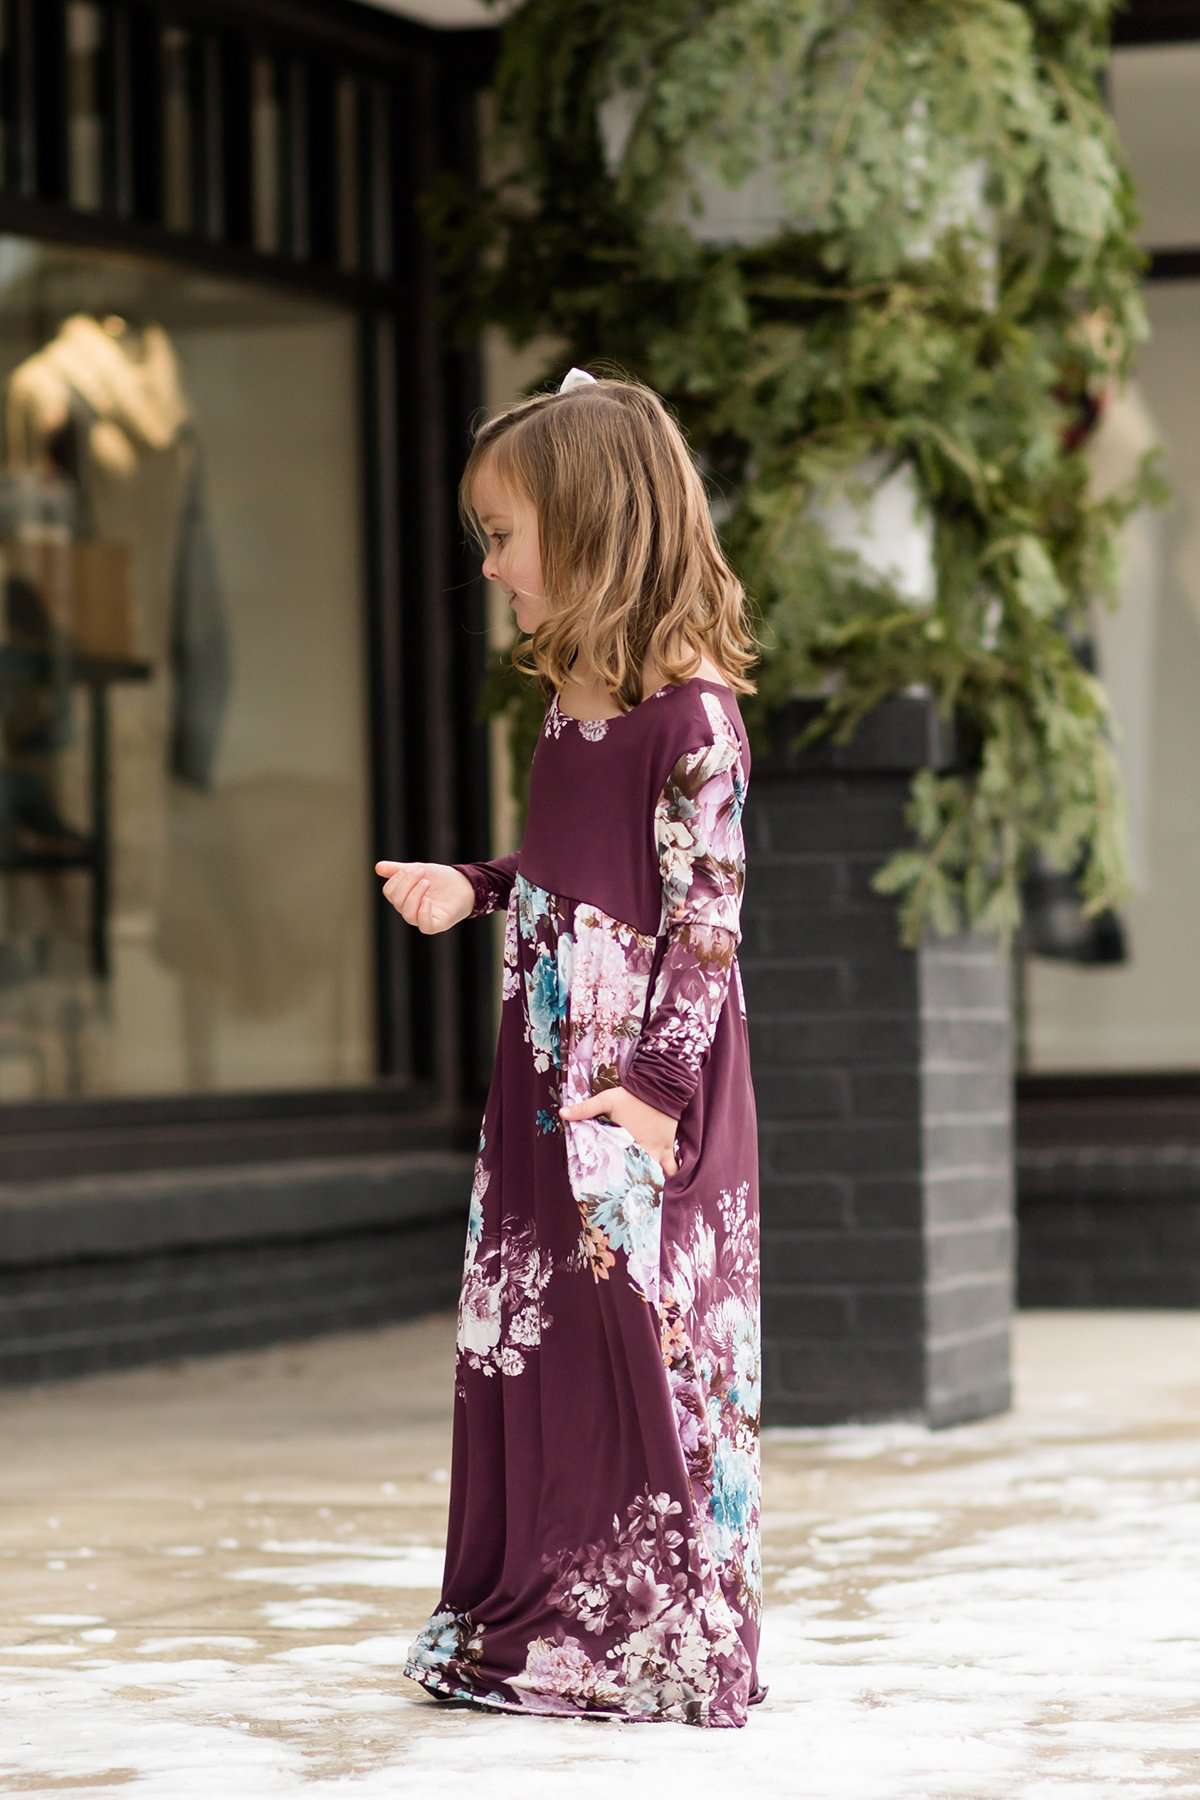 Mommy and me style floral maxi dress in plum or navy